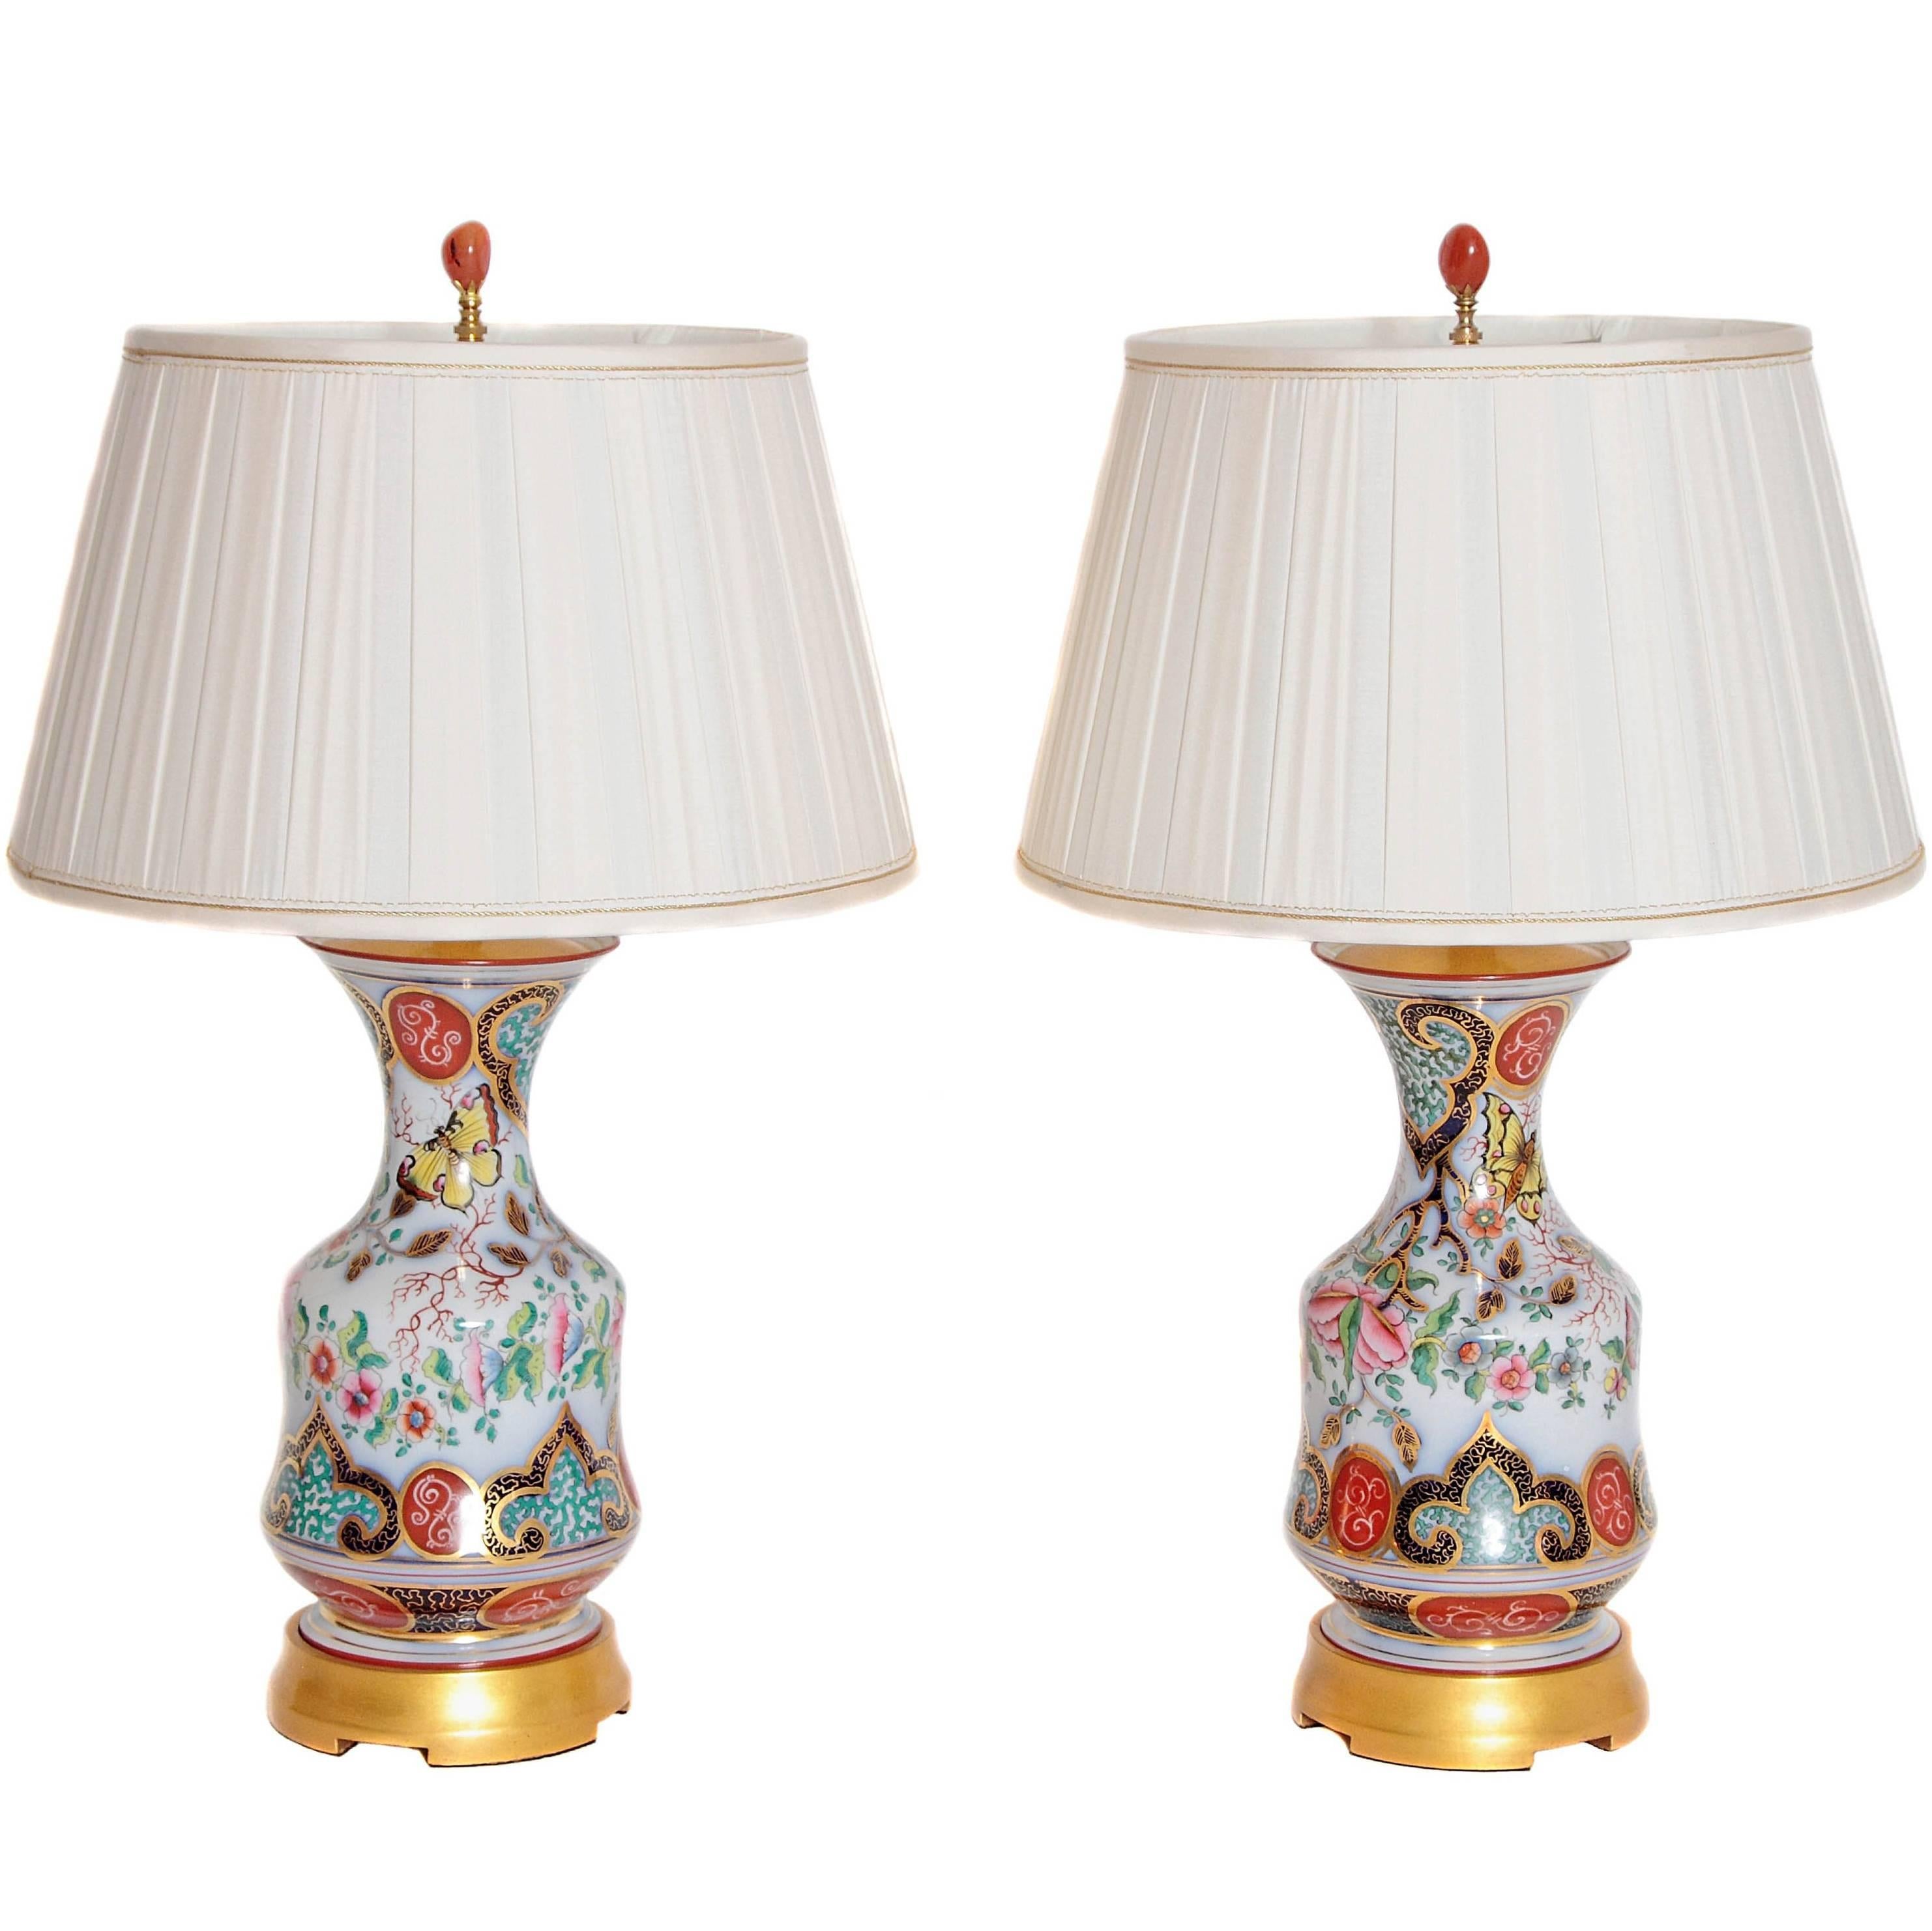 Pair of French Opaline Glass Hand-Painted Urns Converted into Table Lamps